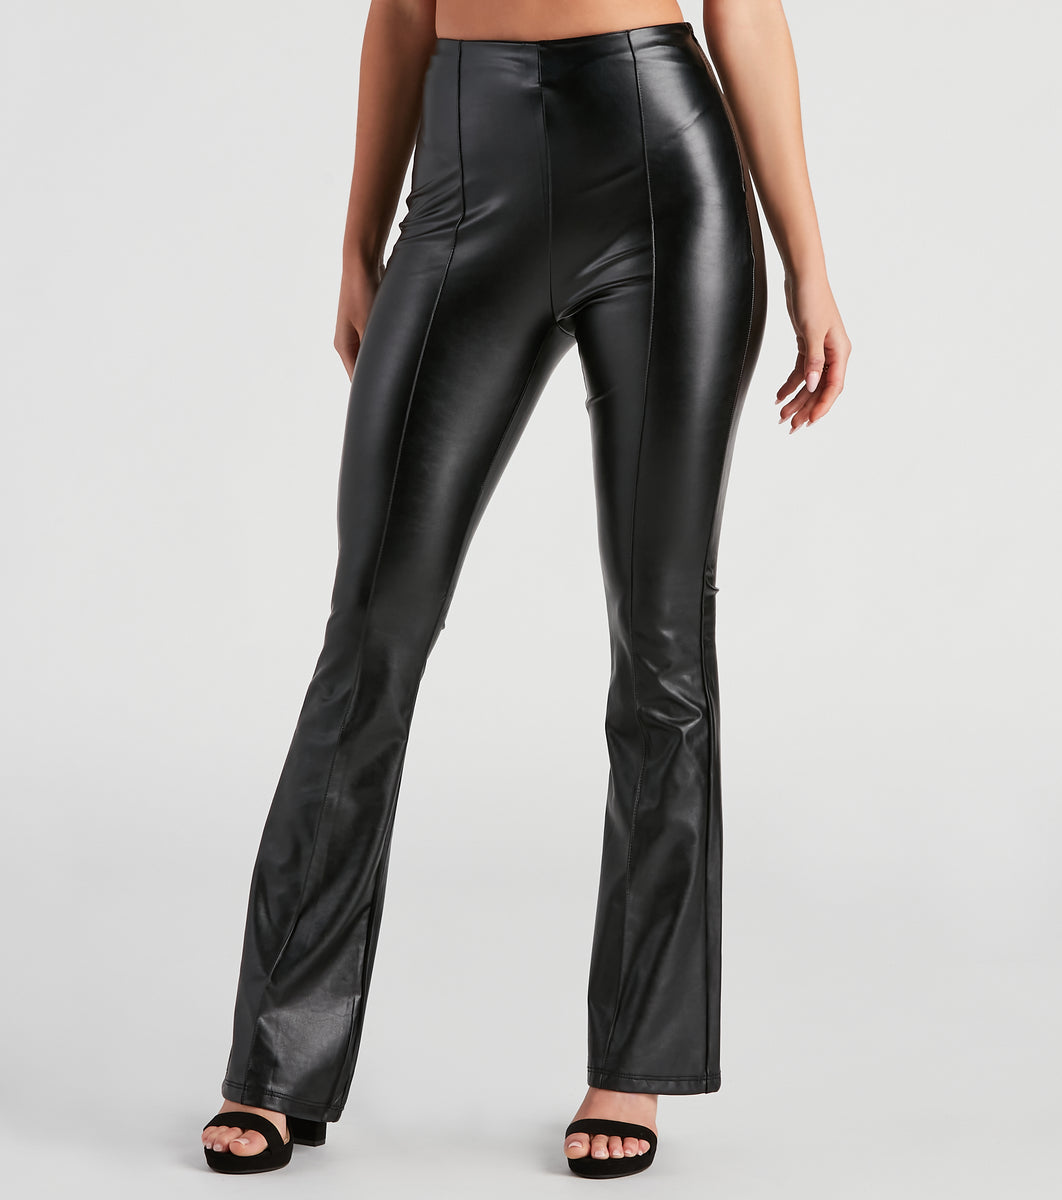 Windsor The Winner Faux Leather Flare Pants